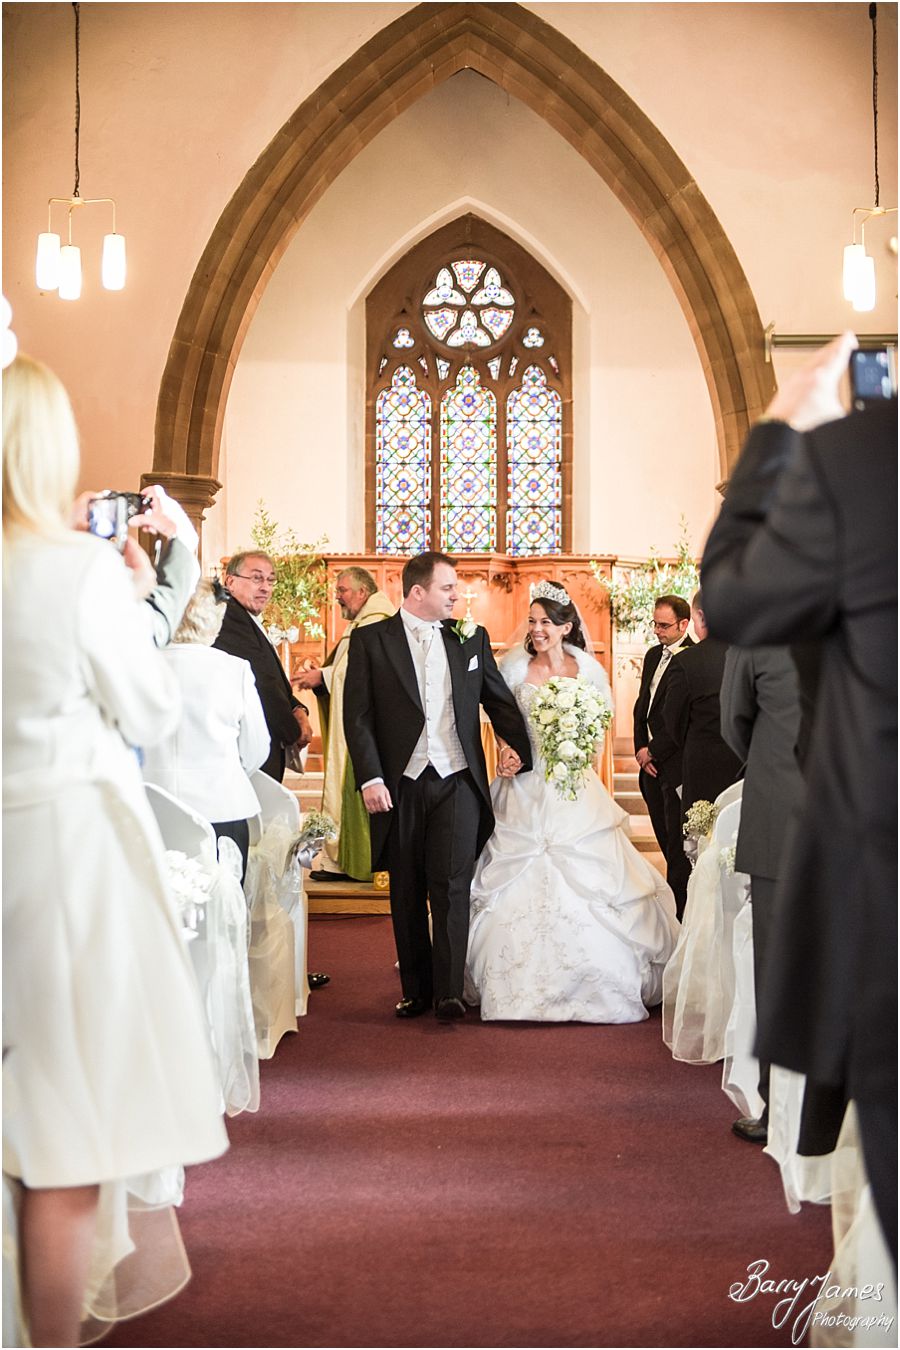 Award winning unobtrusive wedding photography at St Pauls Church in Brewood by Stafford Wedding Photographers Barry James